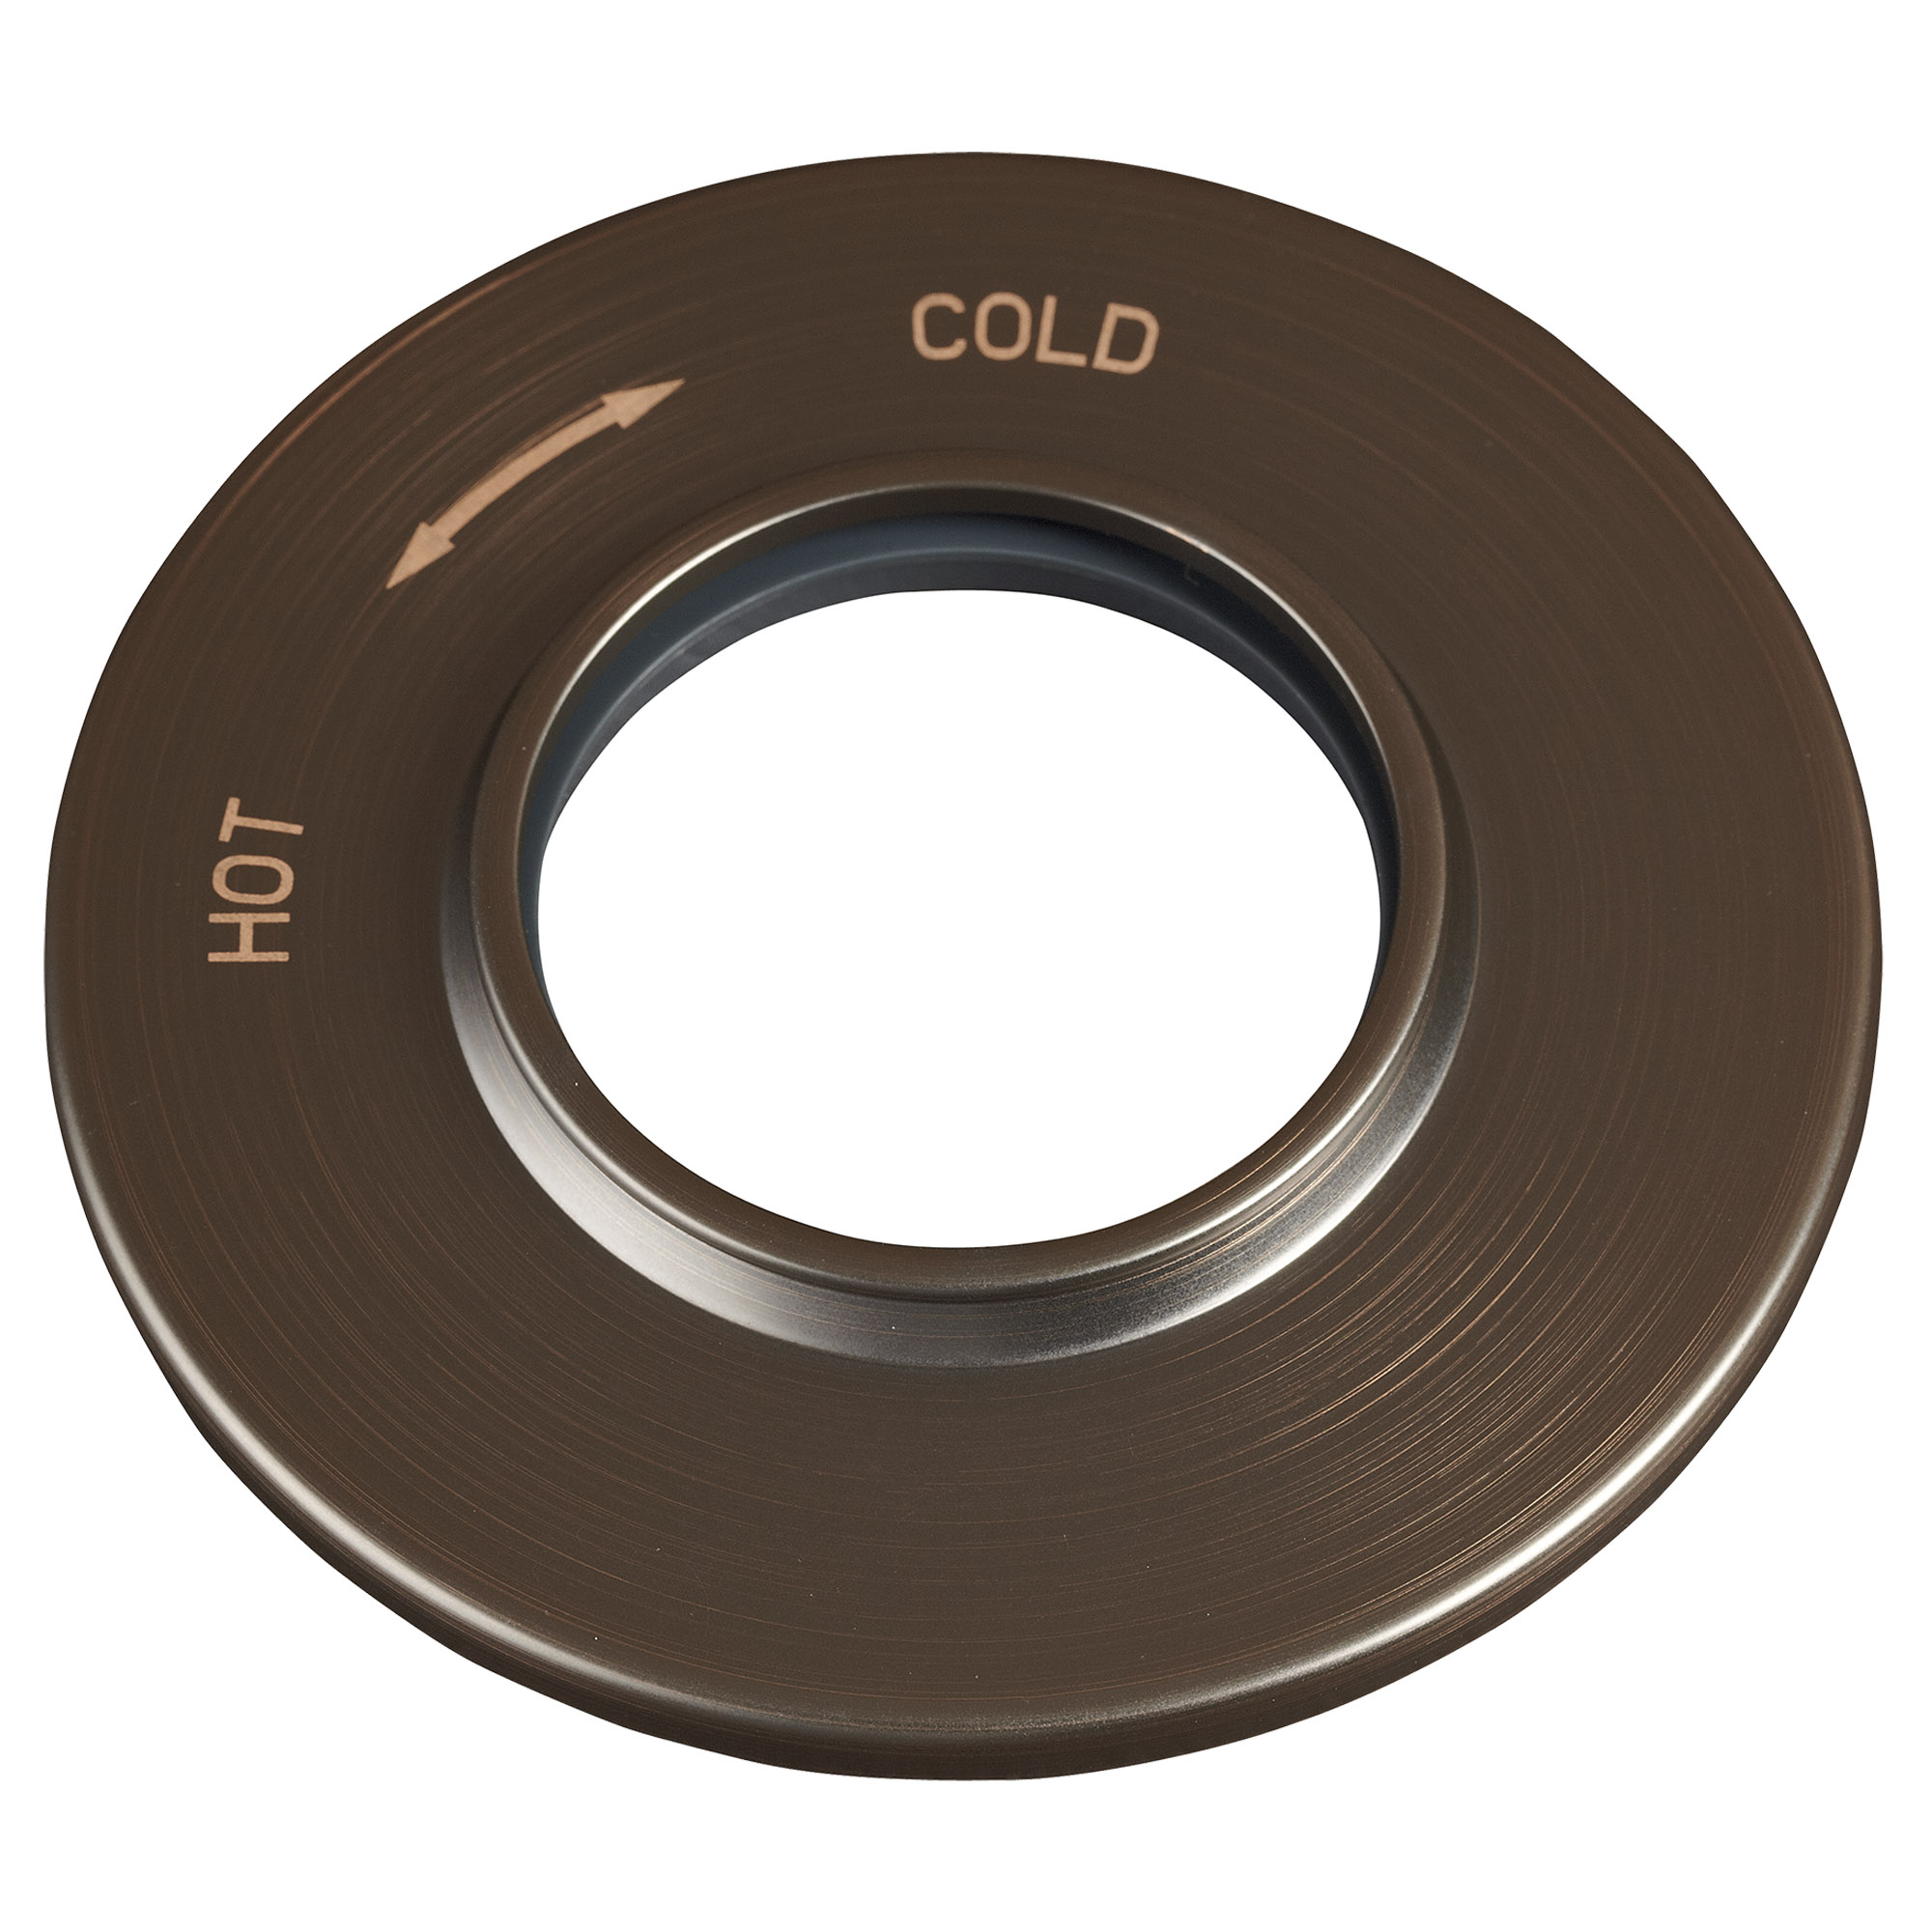 H961235-Ashbee/Col/Vict Cover Ring Thermo